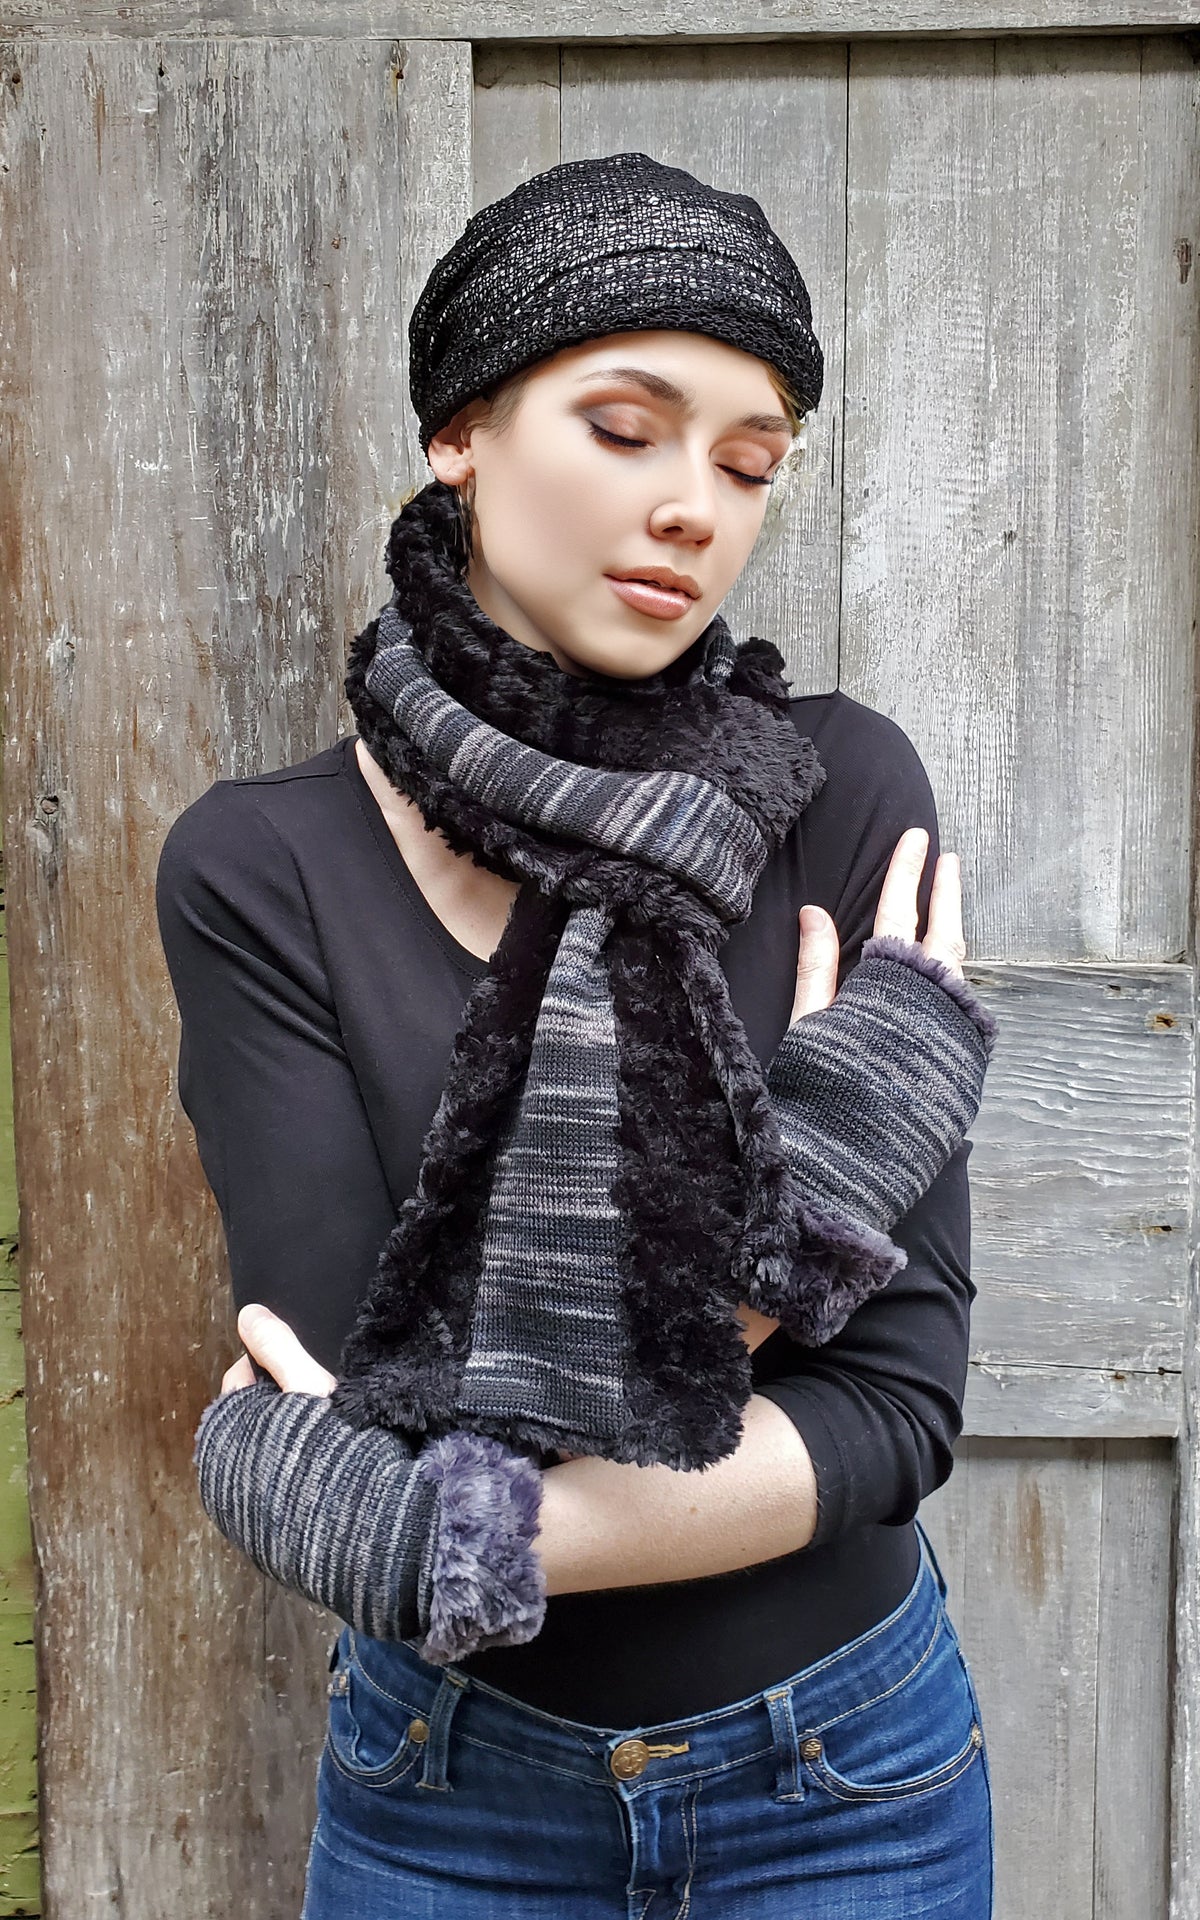 Model against barn door  wearing Classic Scarf, fingerless gloves and rowdy hat   | Sweet Stripes in Blackberry cobbler, blues and grays with  Cuddly Faux Fur in Black | Handmade in Seattle WA Pandemonium Millinery